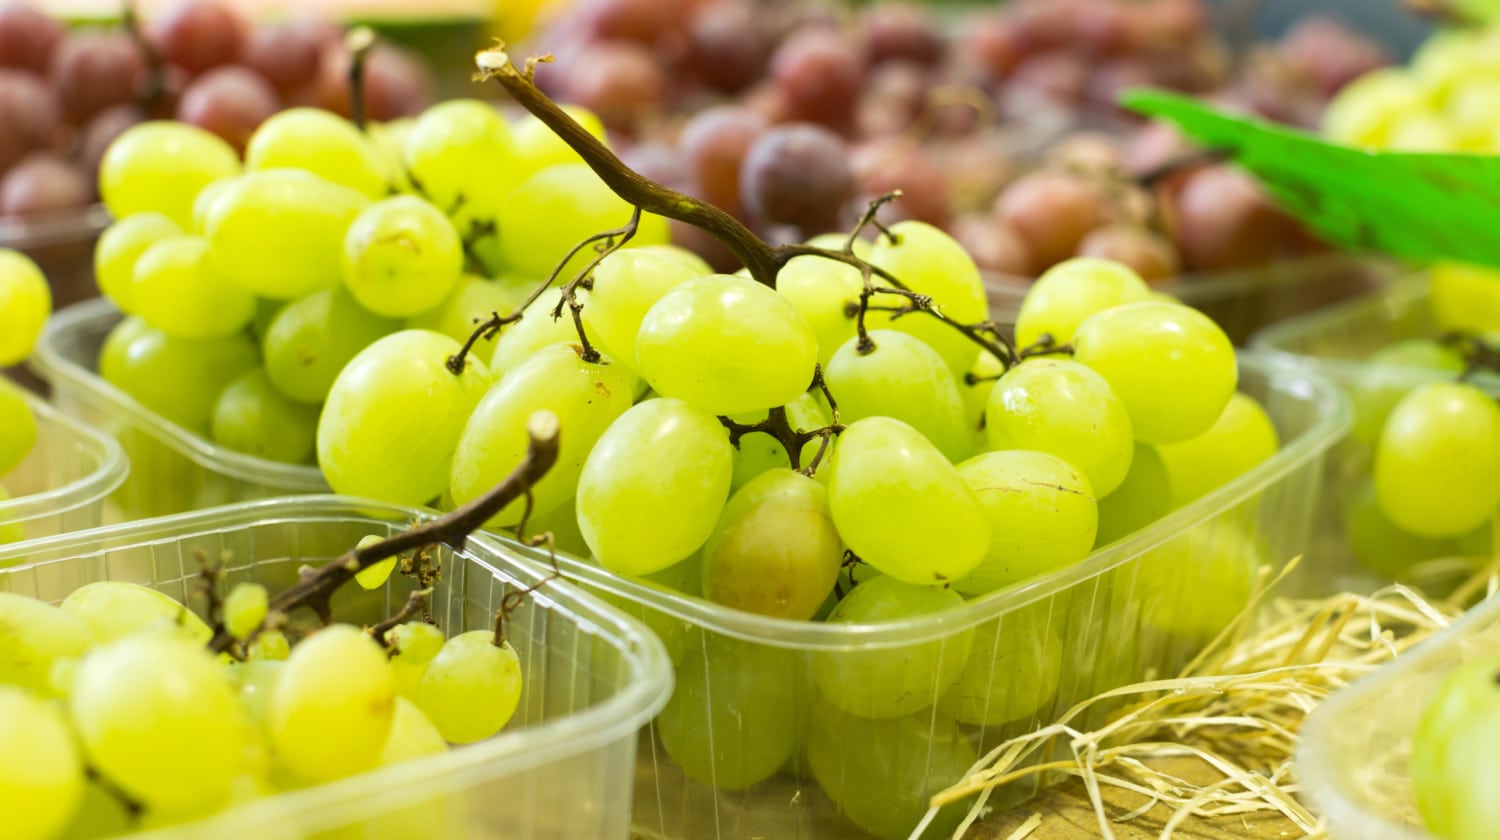 bunch of grapes on the counter market